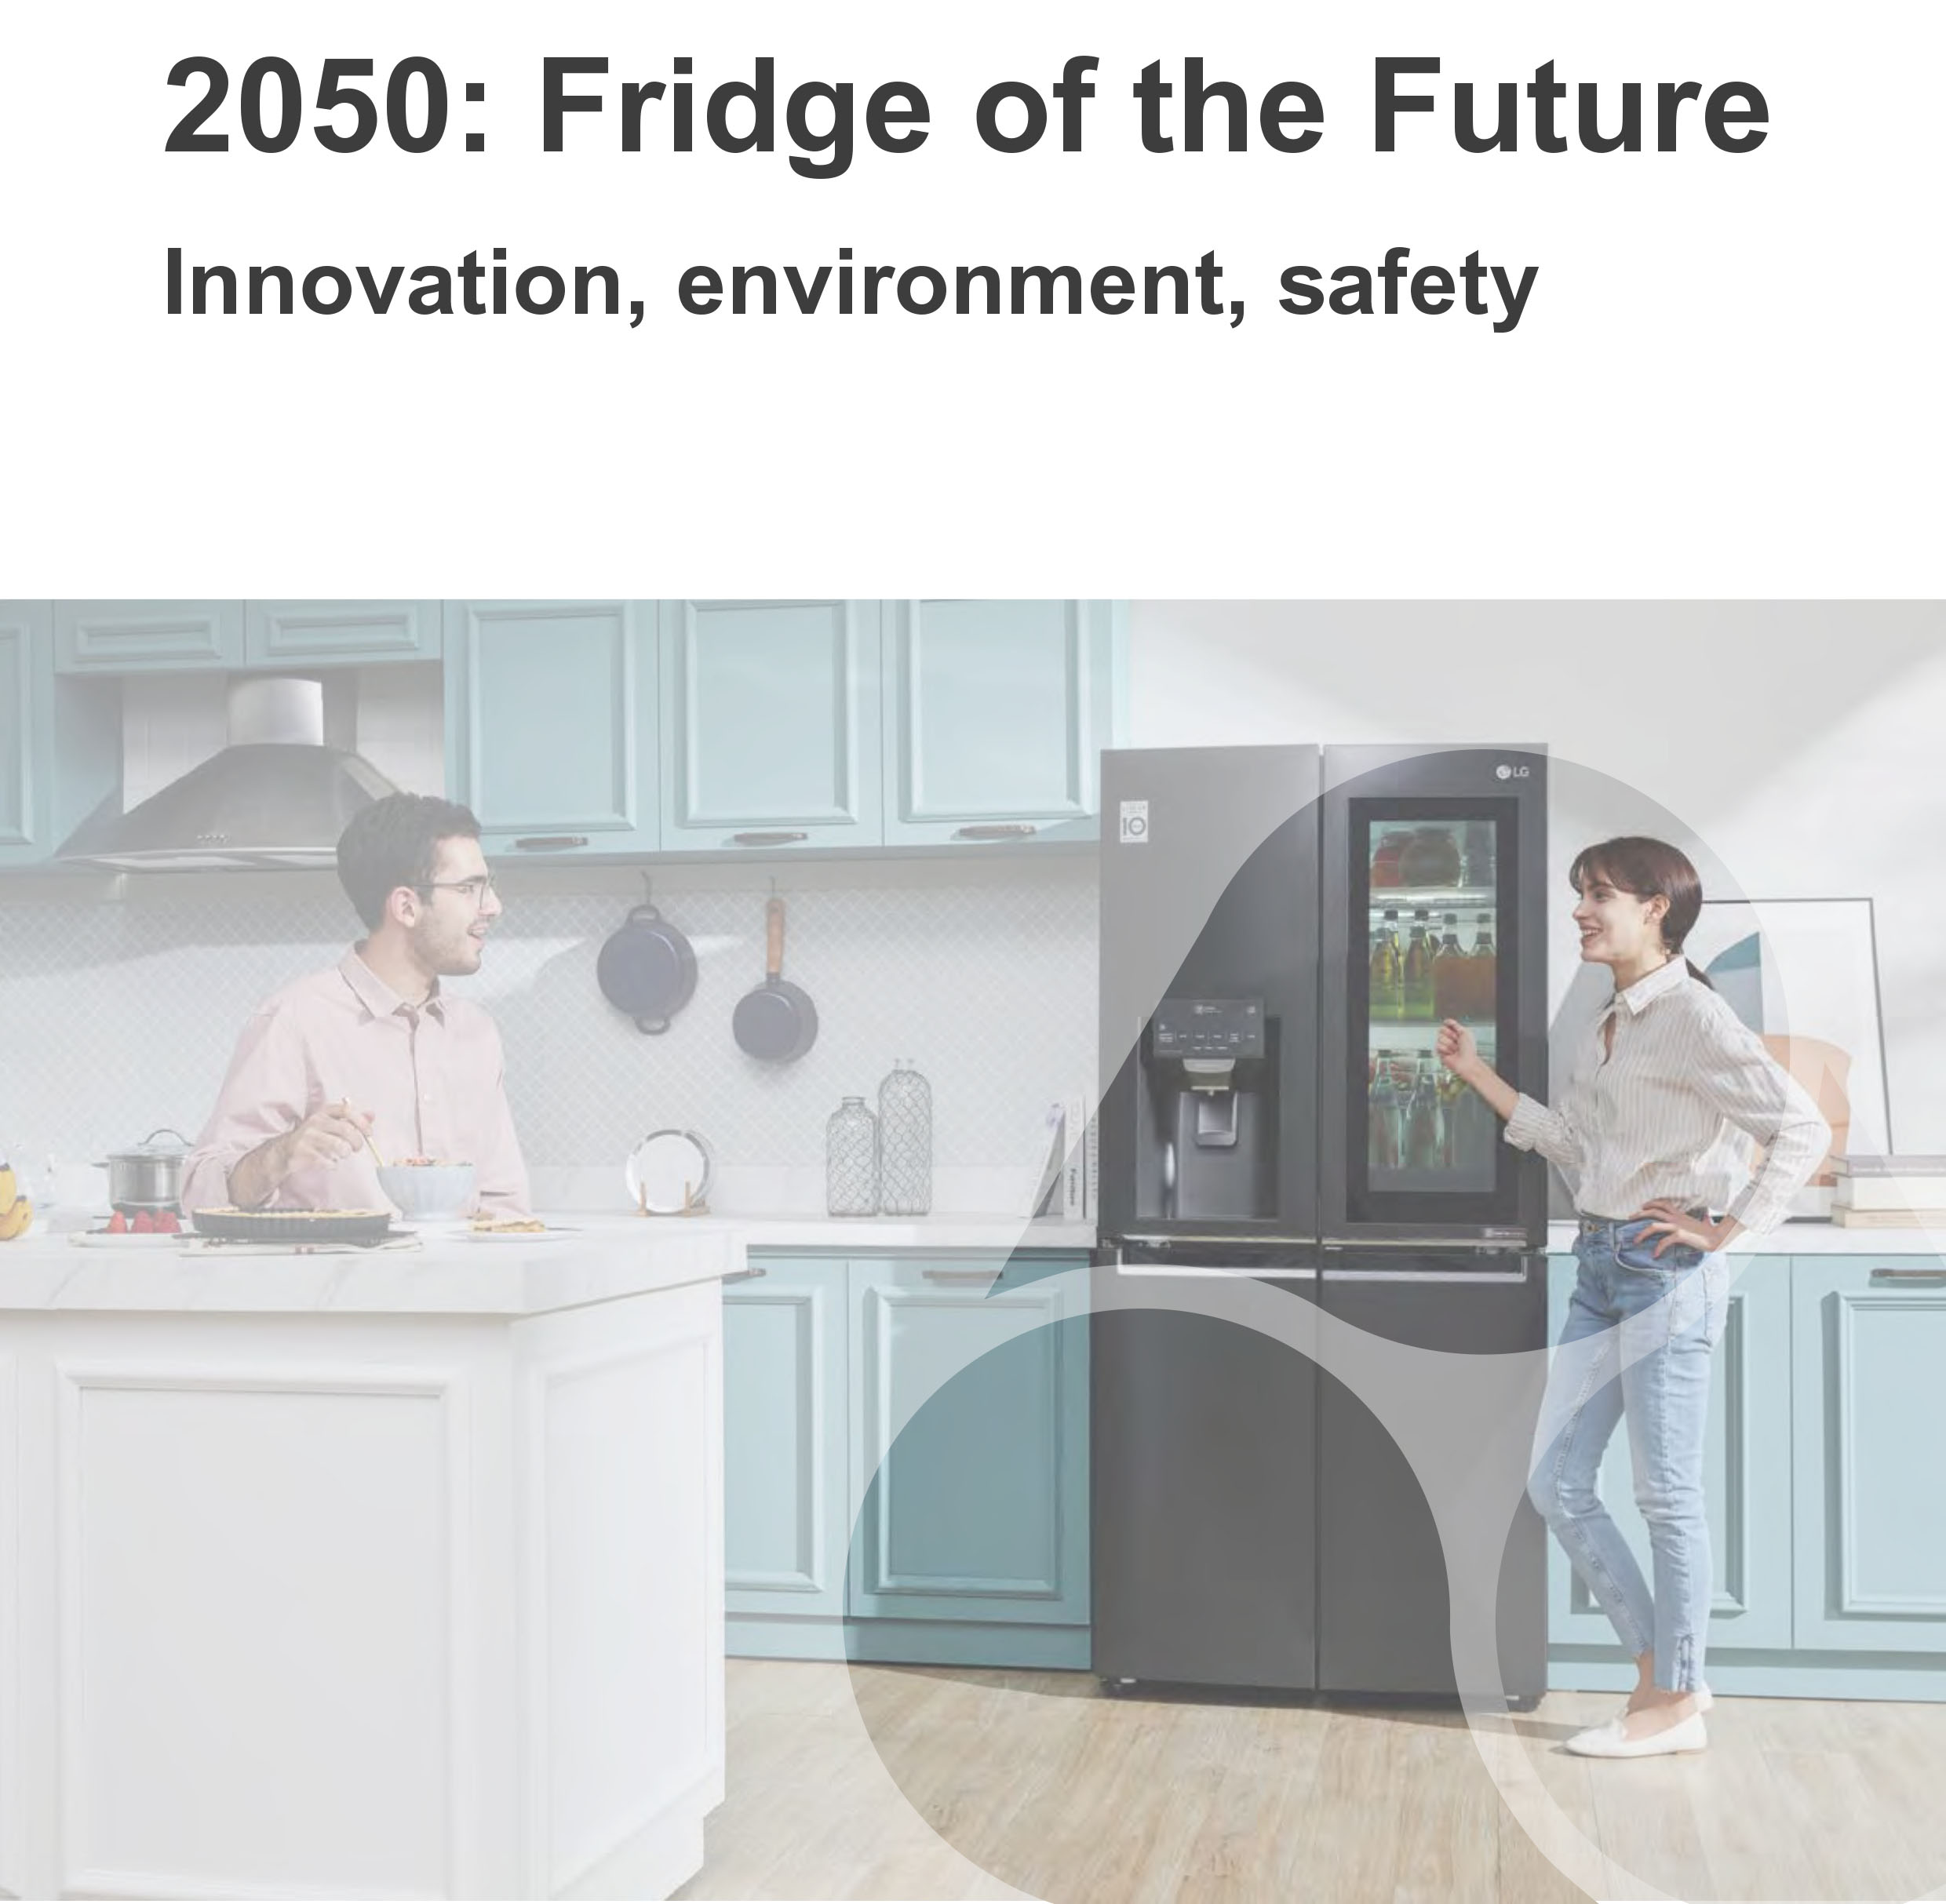 Fridge 2050 report highlights the need for appliances to be futureproof